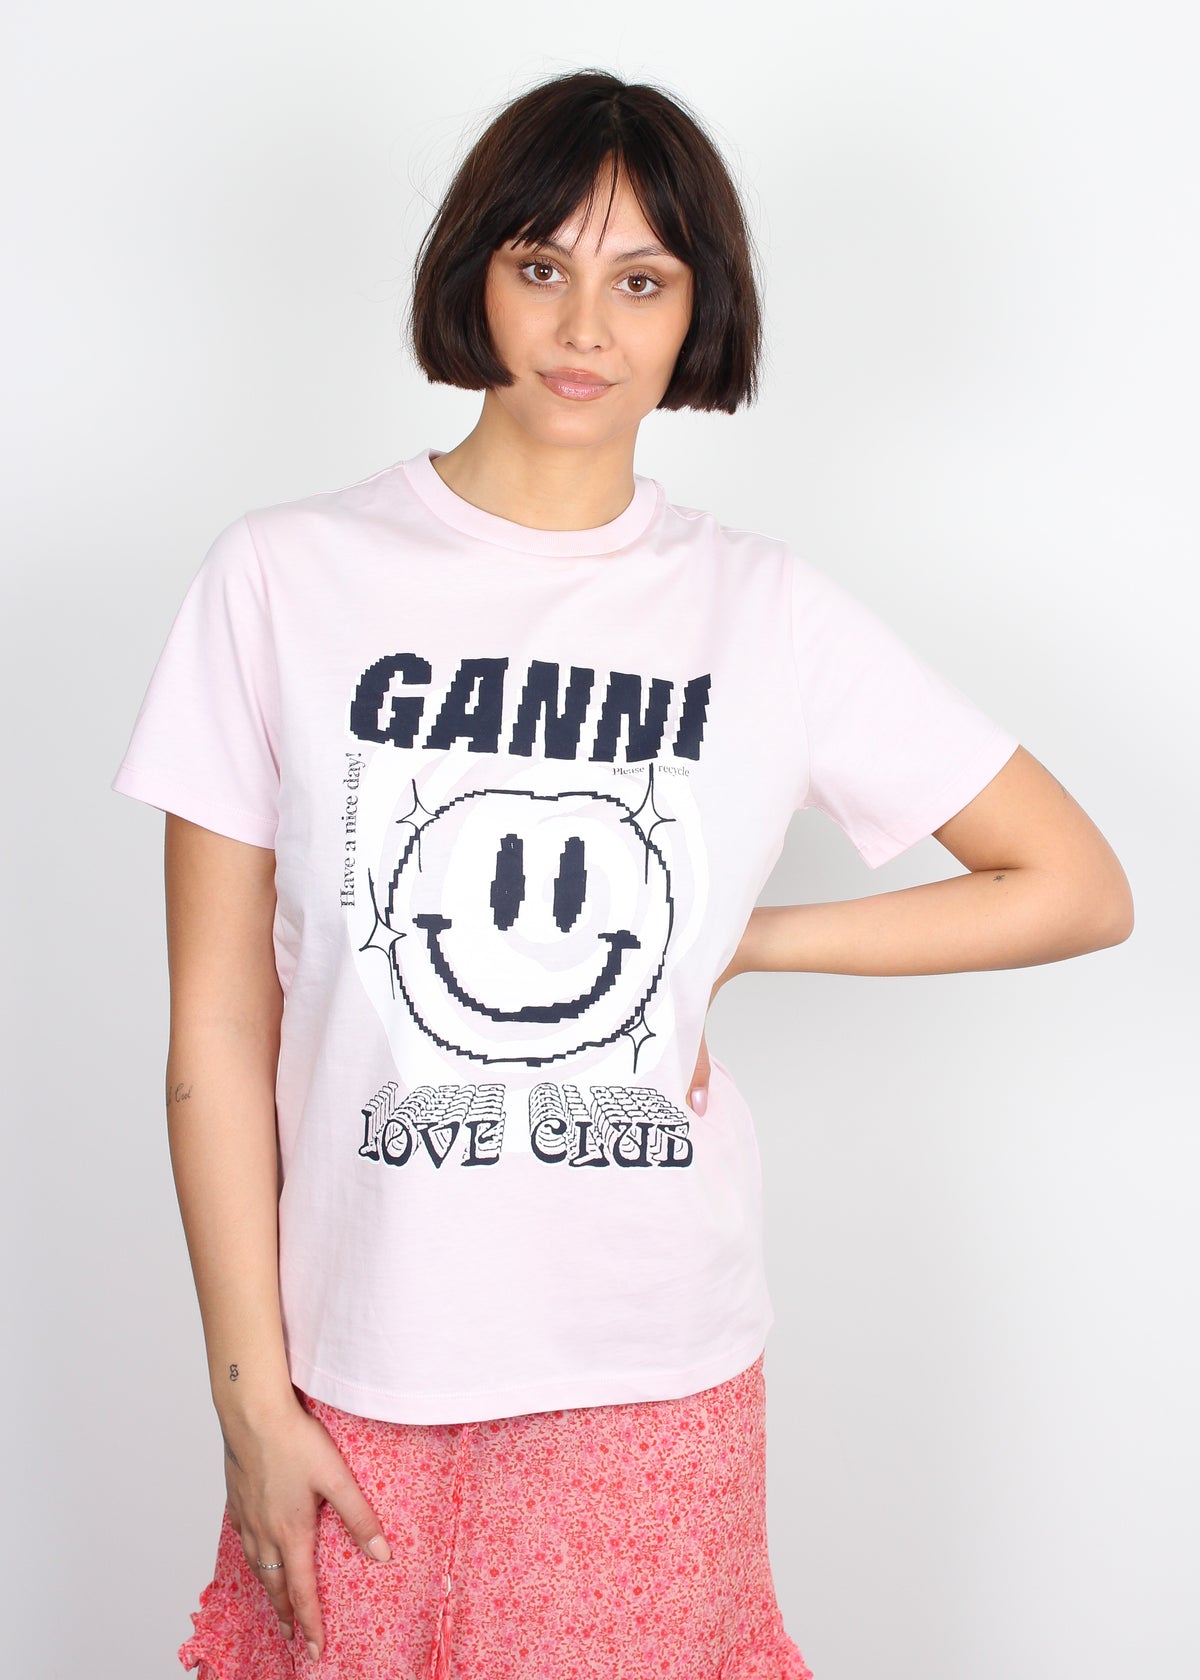 GANNI T3139 Smiley T-shirt in Light Lilac